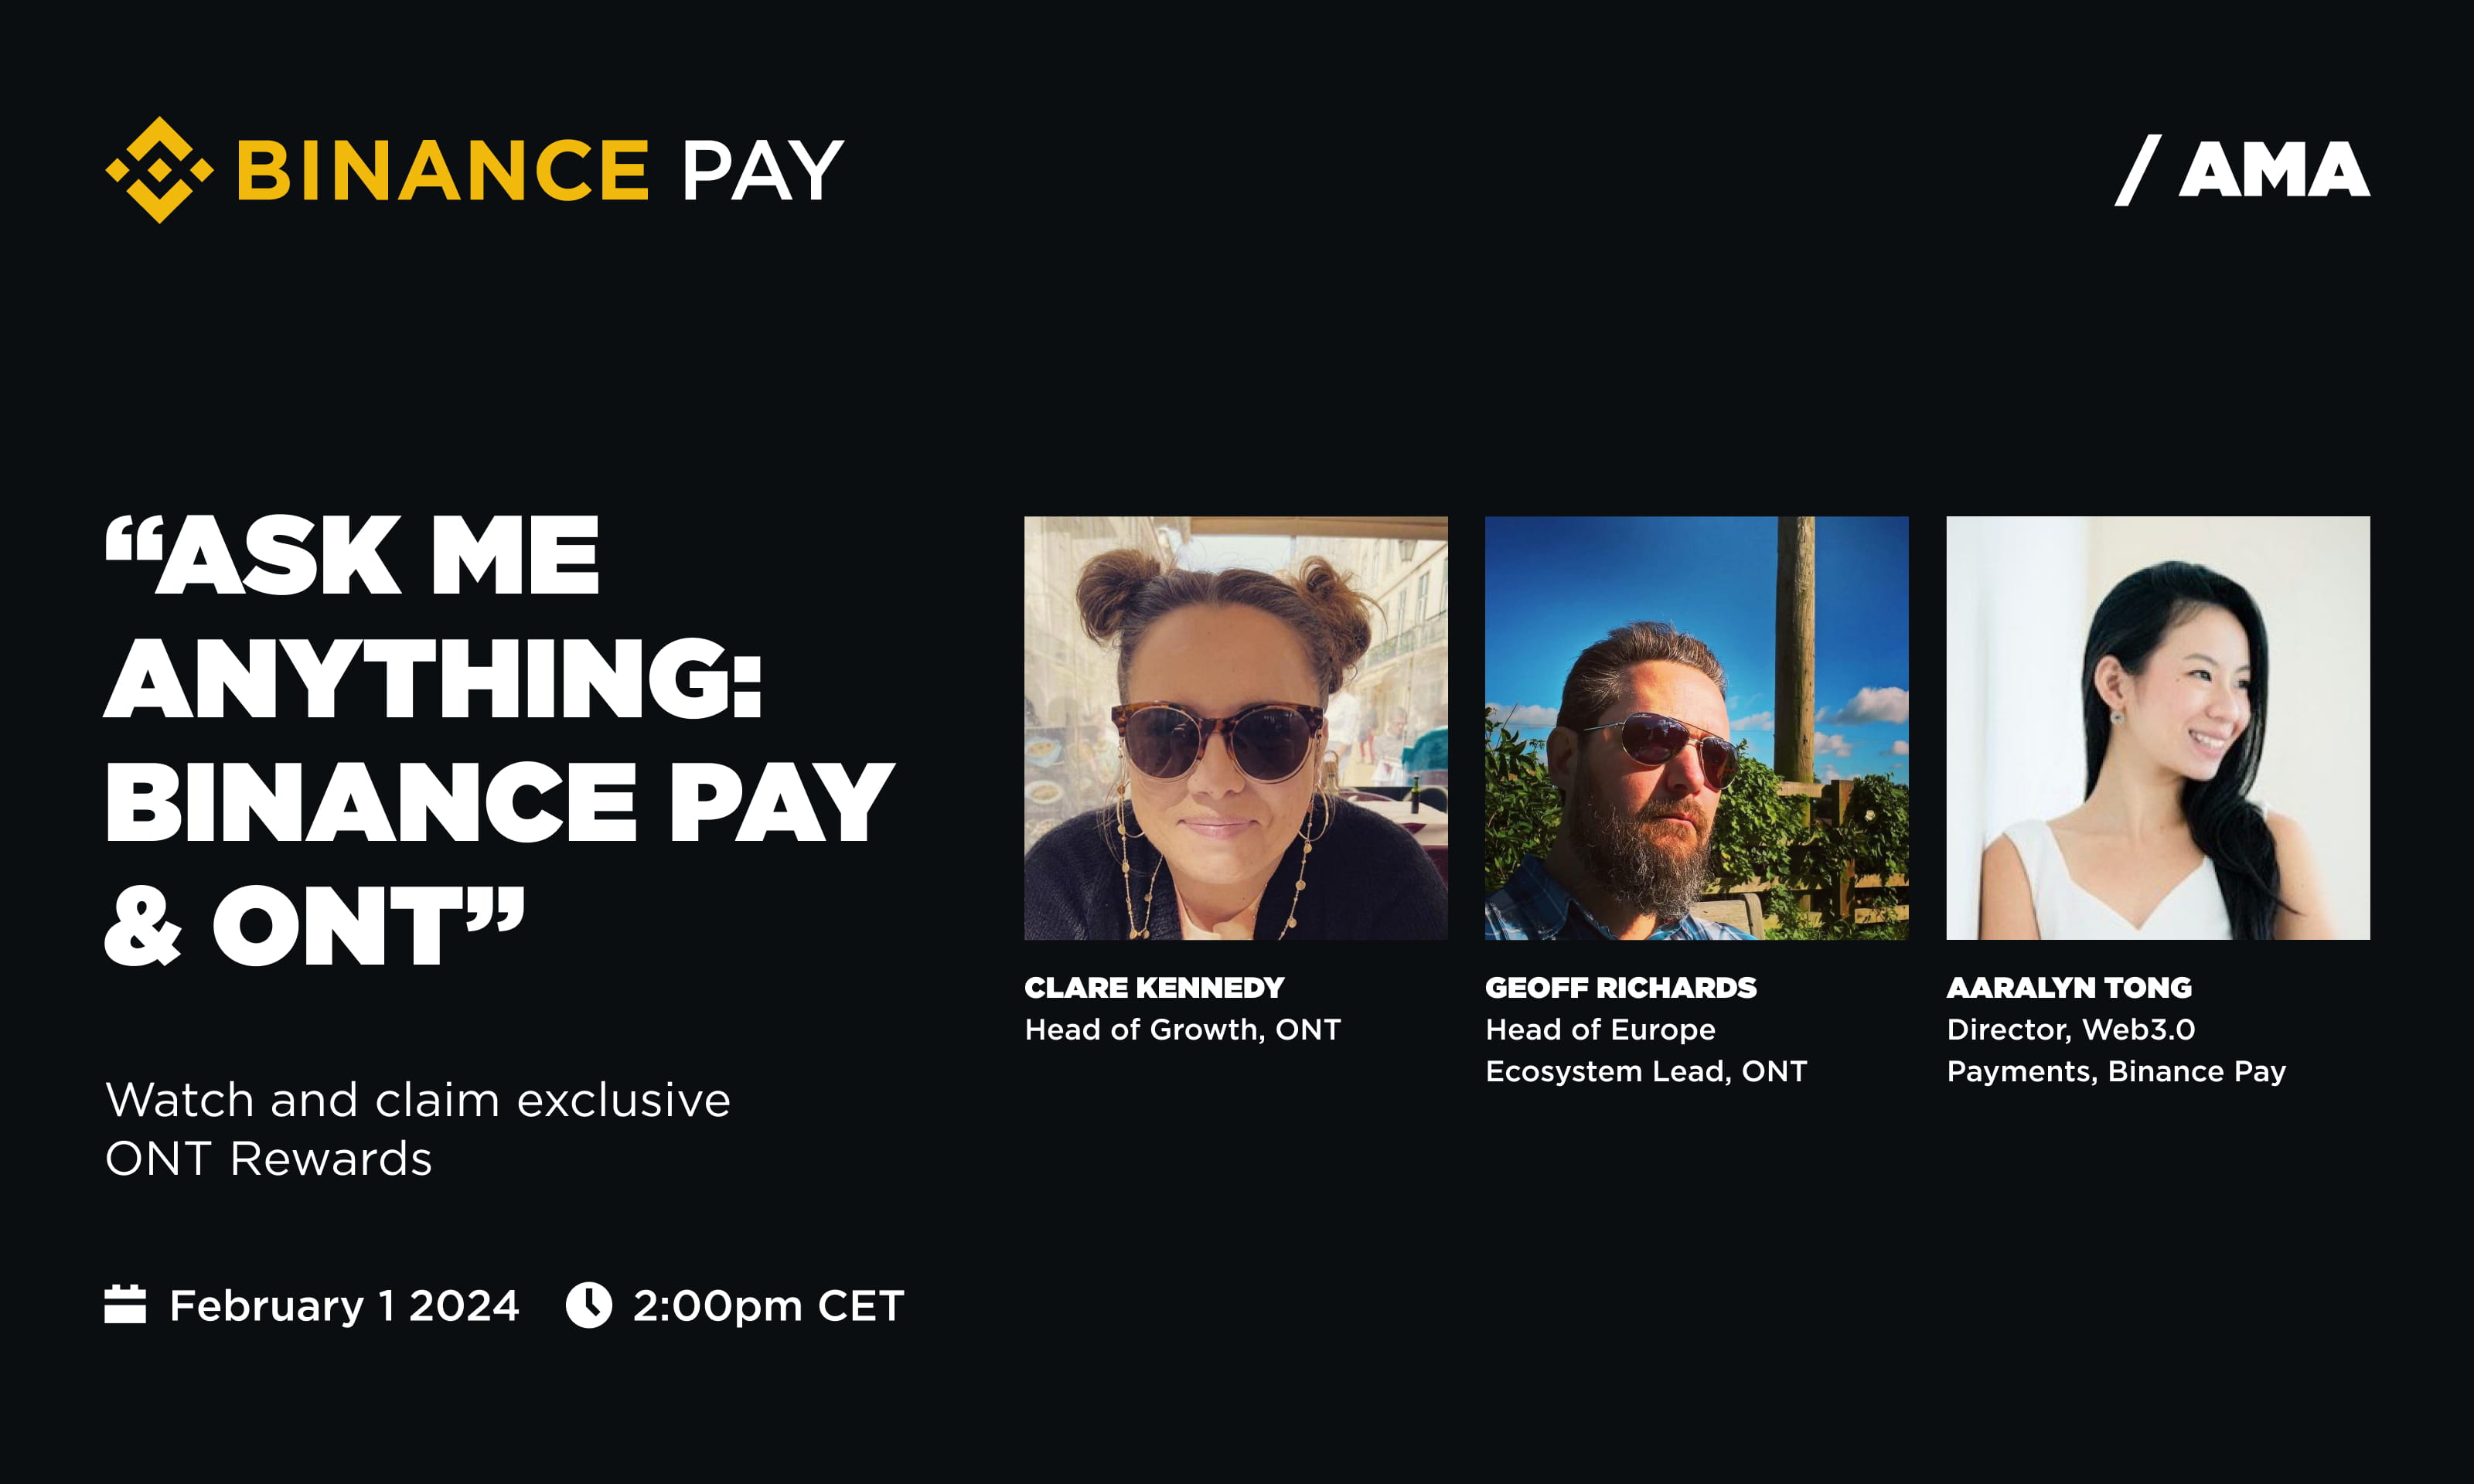 Ask me anything: Binance Pay & ONT